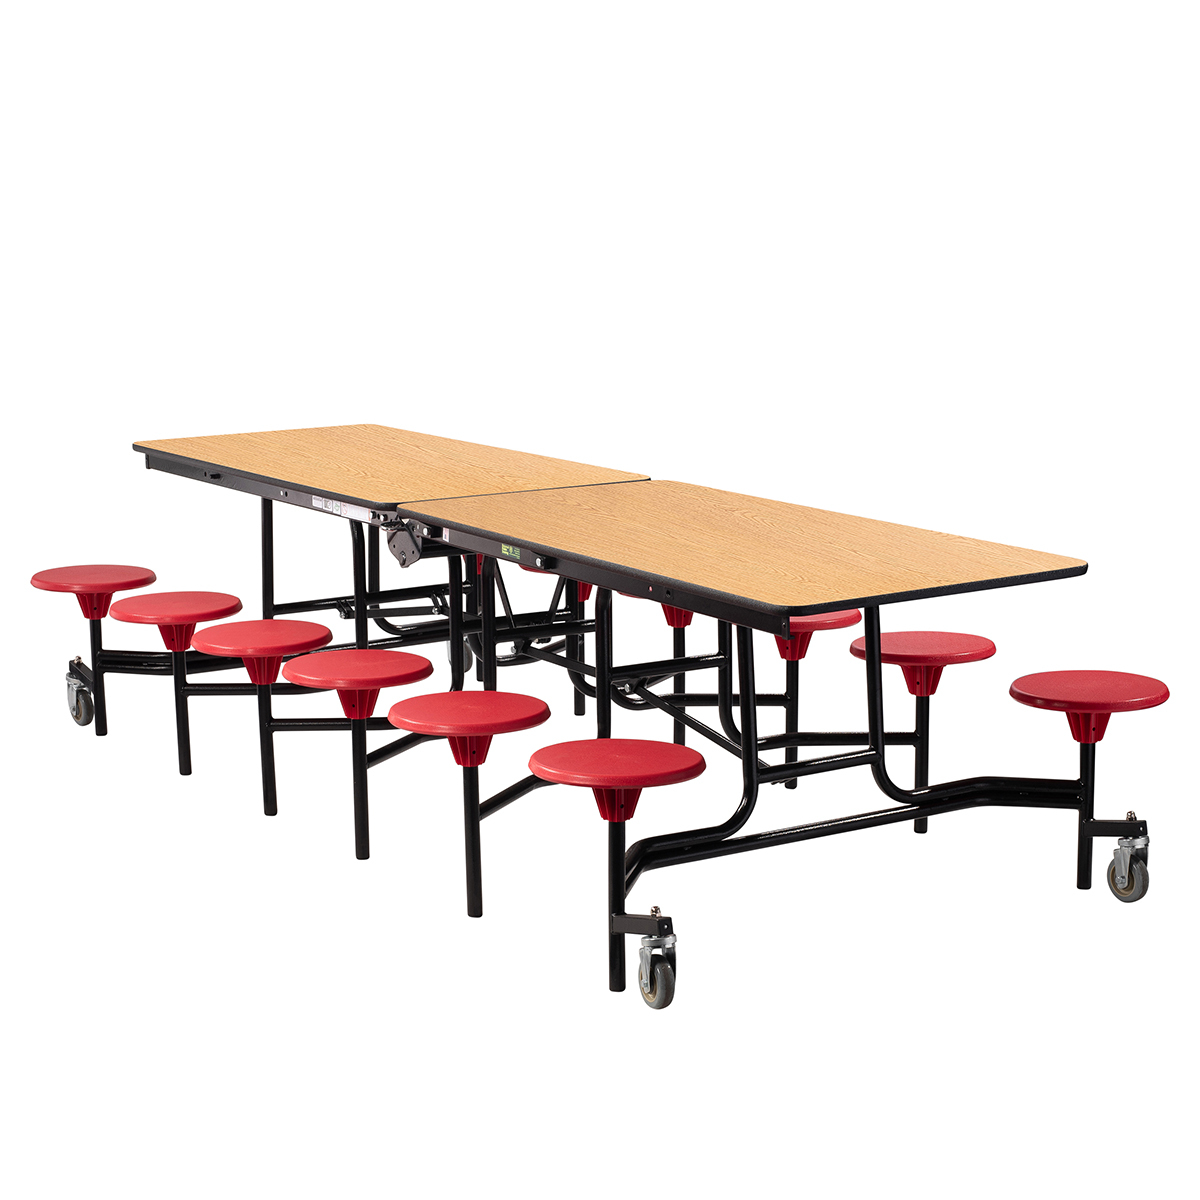 NPS 10′ Mobile Stool Cafeteria Table, MDF Core, Protect Edge, Black Frame